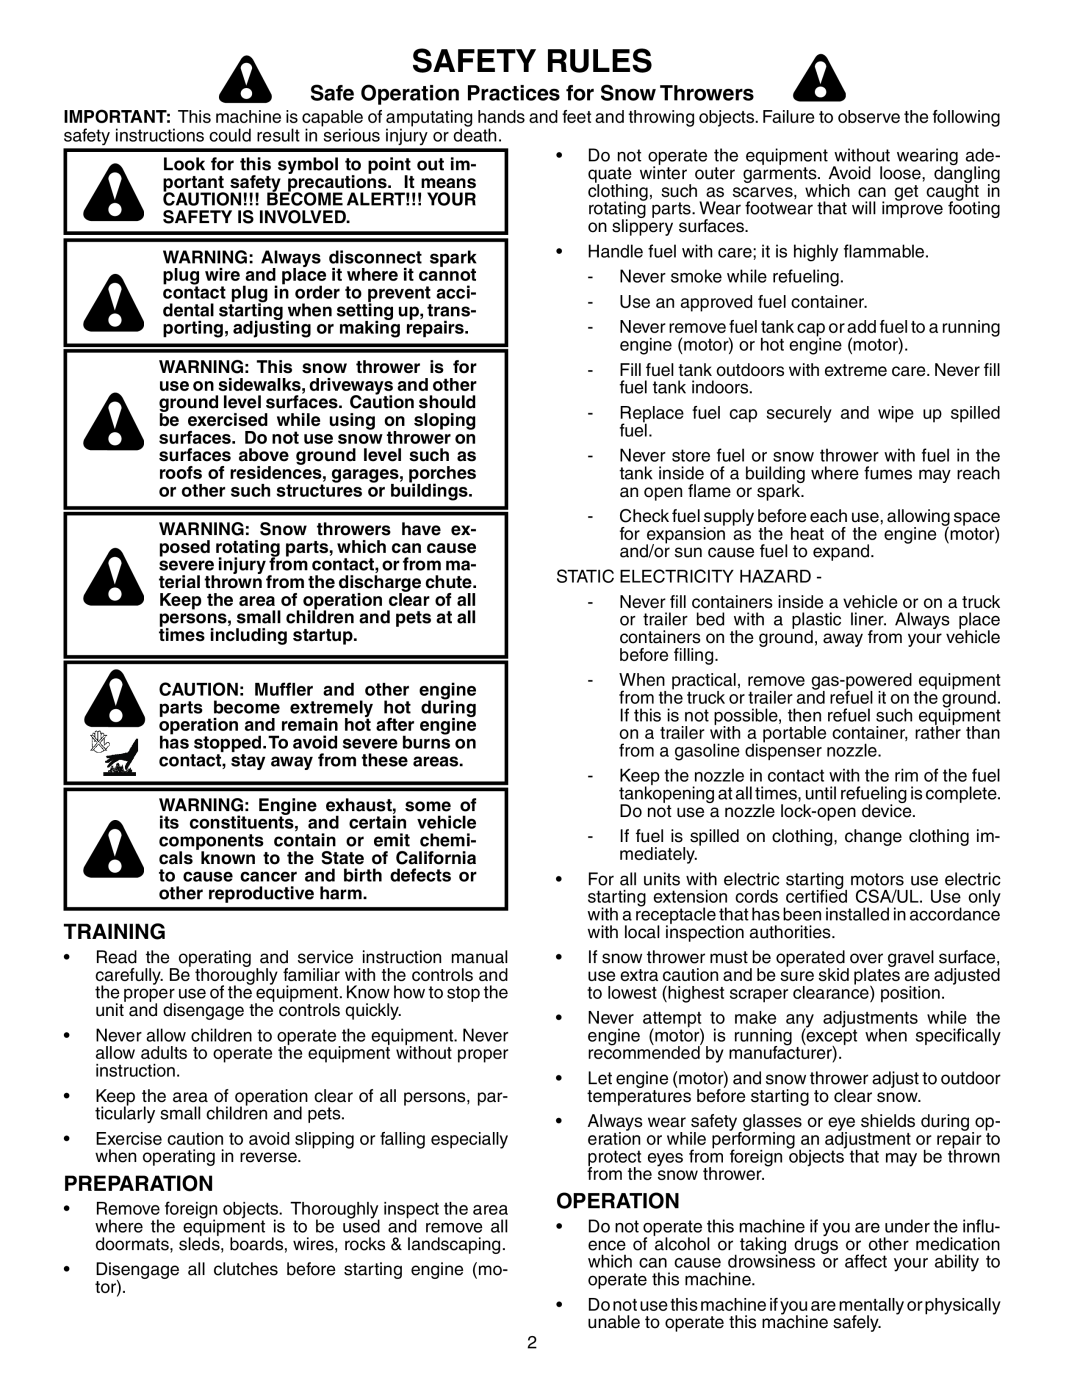 Husqvarna 524ST owner manual Safety Rules, Safe Operation Practices for Snow Throwers, Training, Preparation 